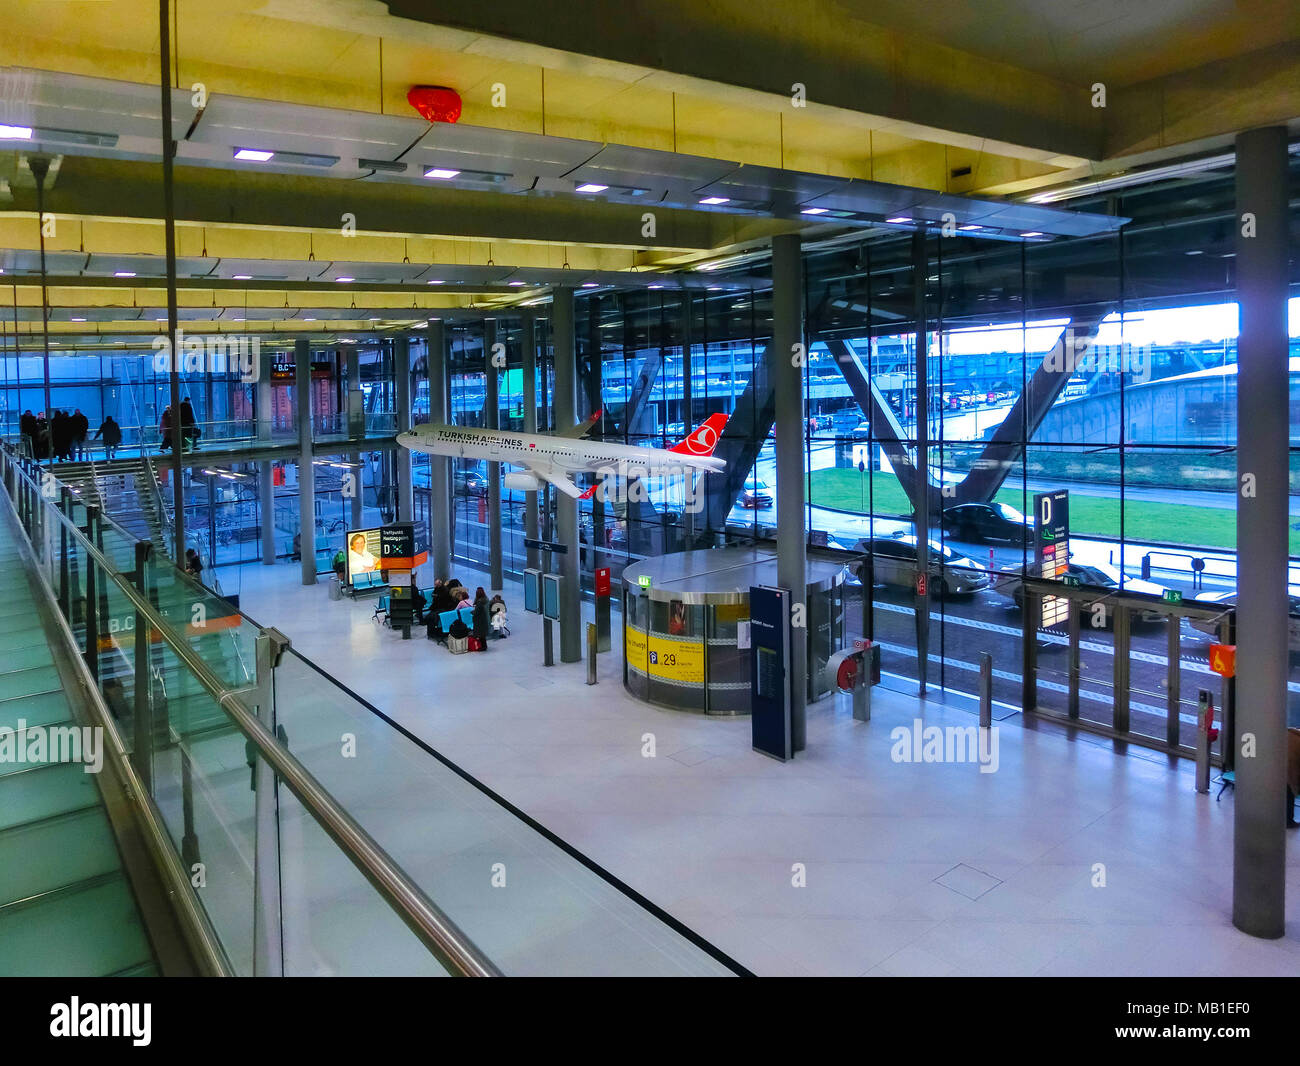 Cologne, Germany - December 12, 2017: The inside view of Cologne Bonn Airport. Stock Photo